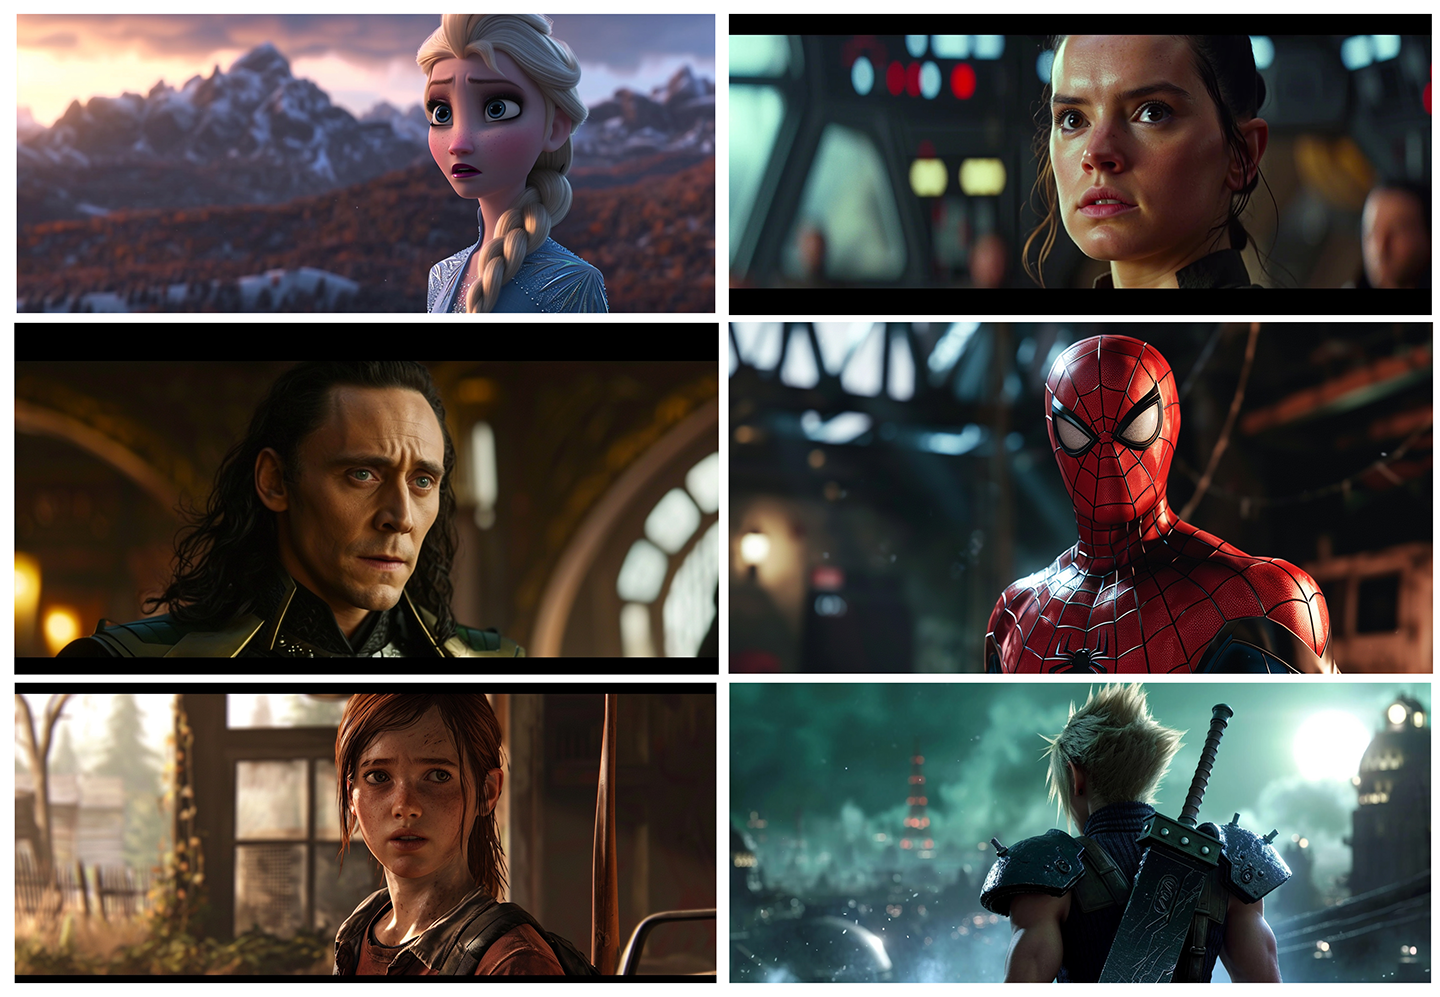 a set pf six images generated using the word 'screencap' showing characters that strongly resemble copyrighted characters. From top left to bottom right: Elsa from Frozen, Rey from Star Wars, Loki (middle left) and Spiderman (middle right) from the Marvel movieverse, Ellie from the videogame 'The Last of Us' and Cloud Strife from Final Fantasy VII videogame